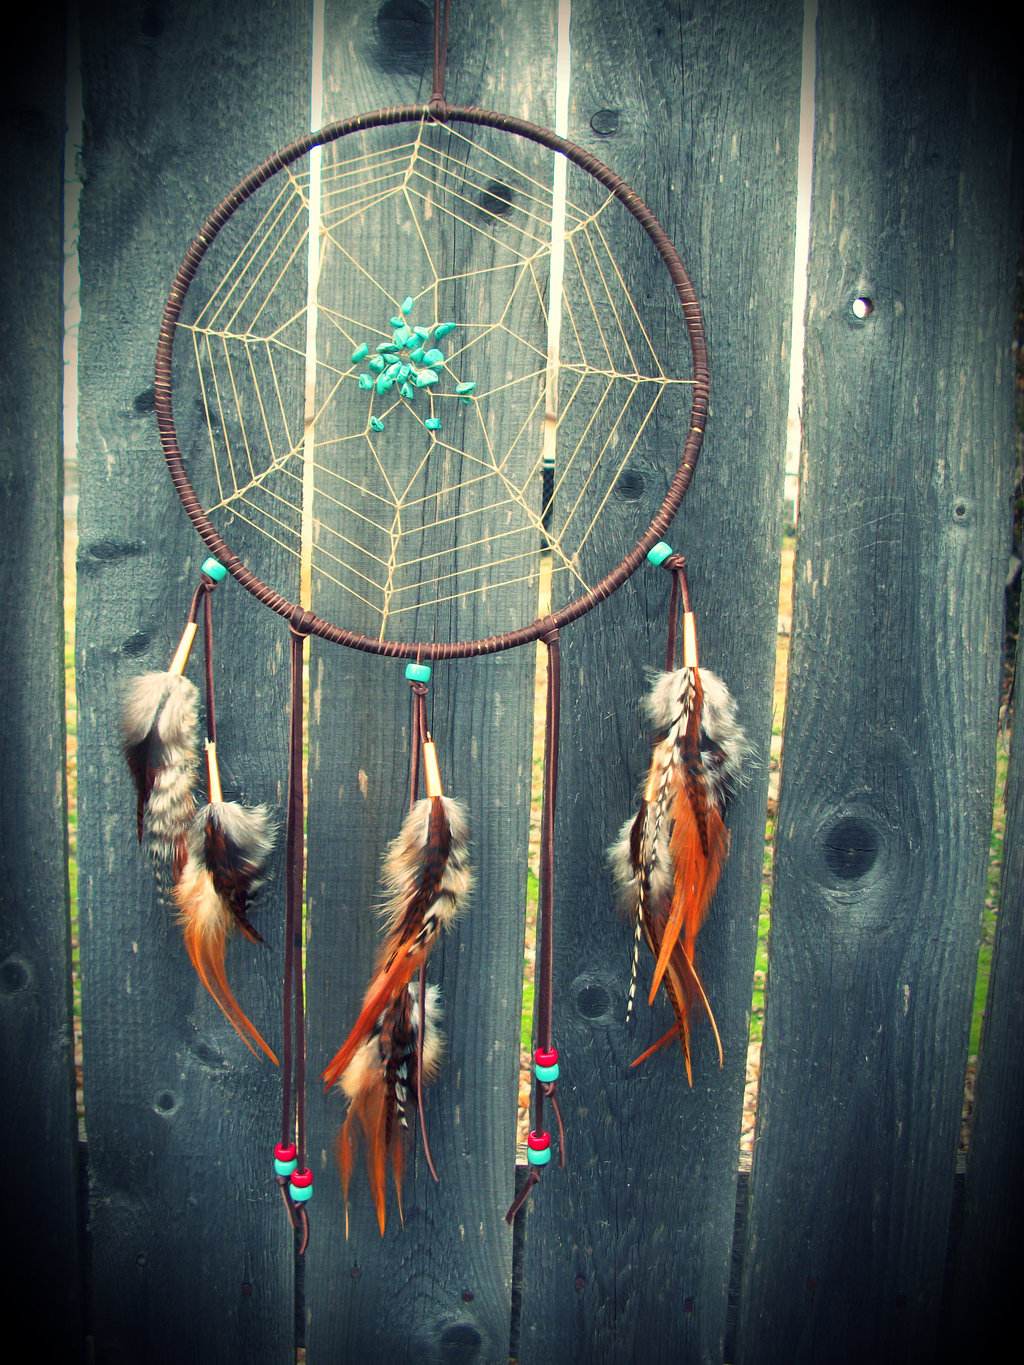 Chocolate and Turquoise Dream Catcher by xsaraphanelia on